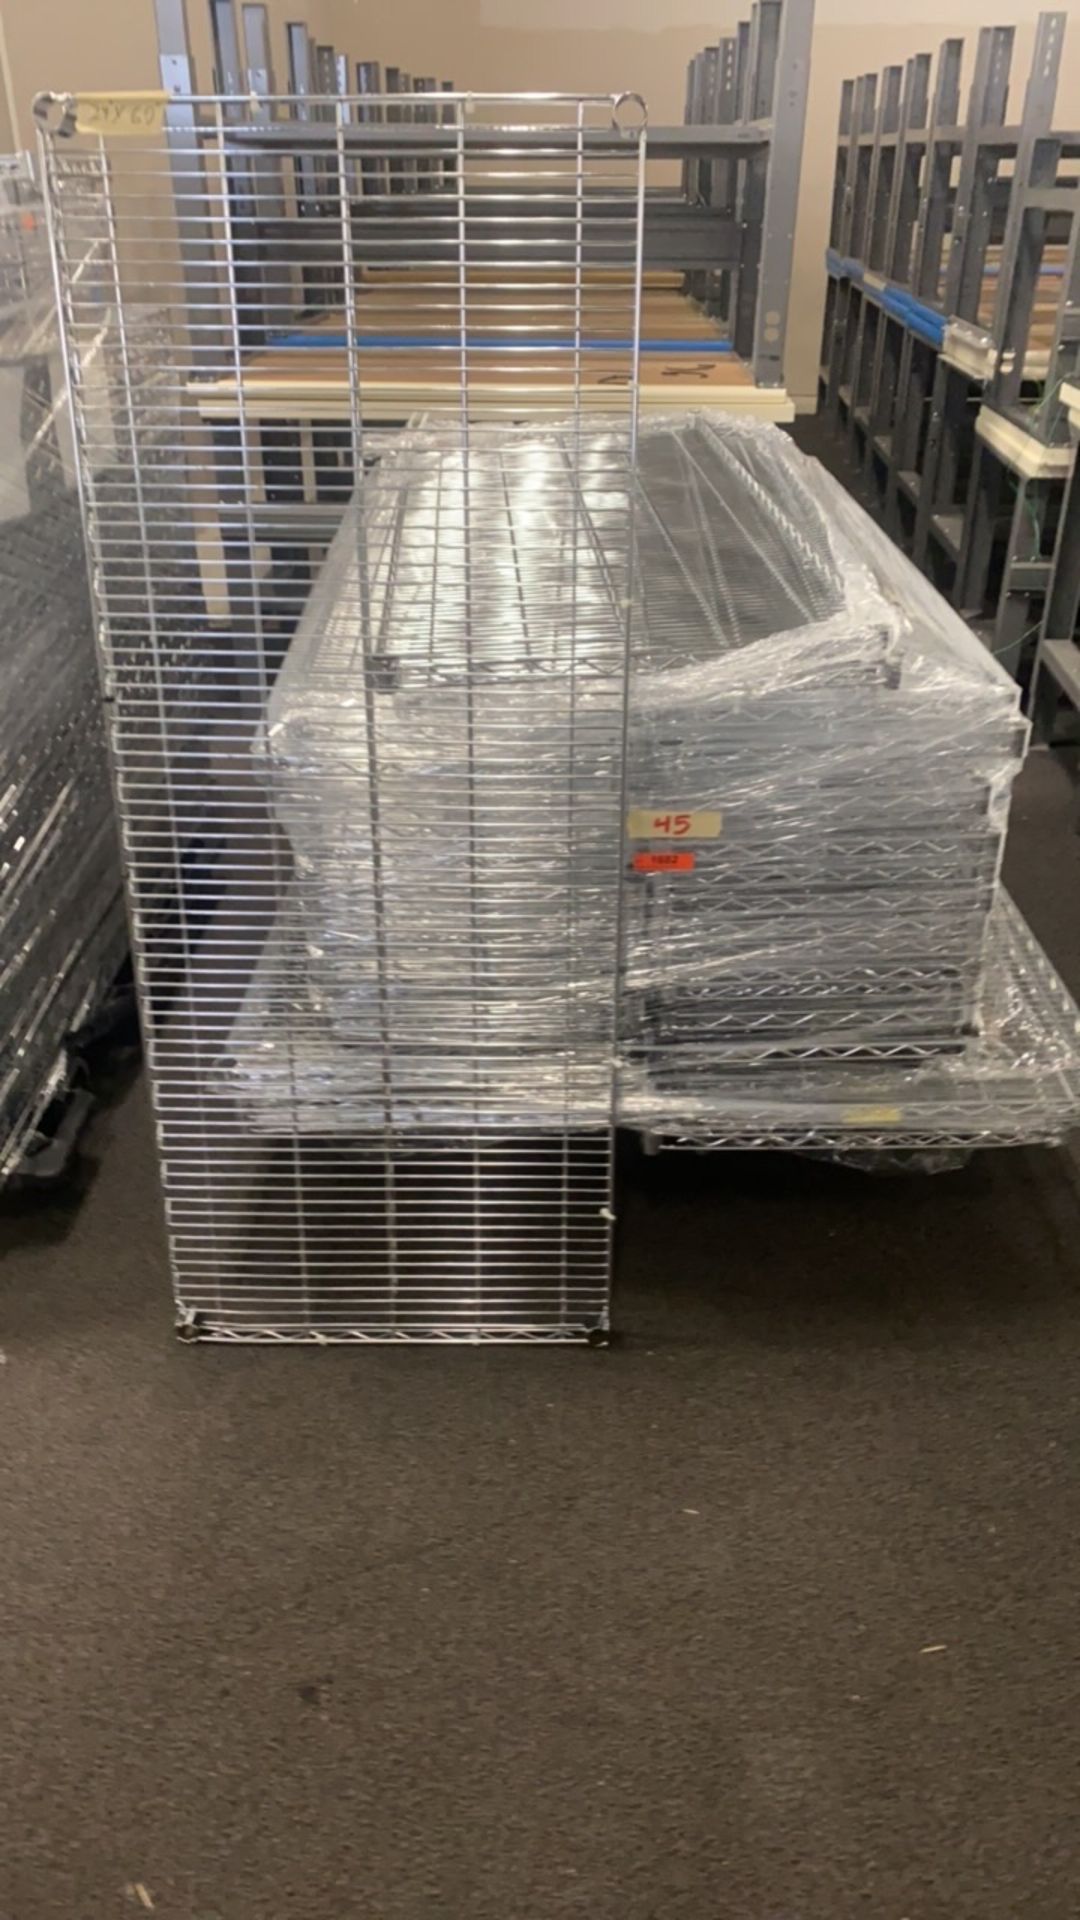 PALLET OF 45 WIRE SHELVES